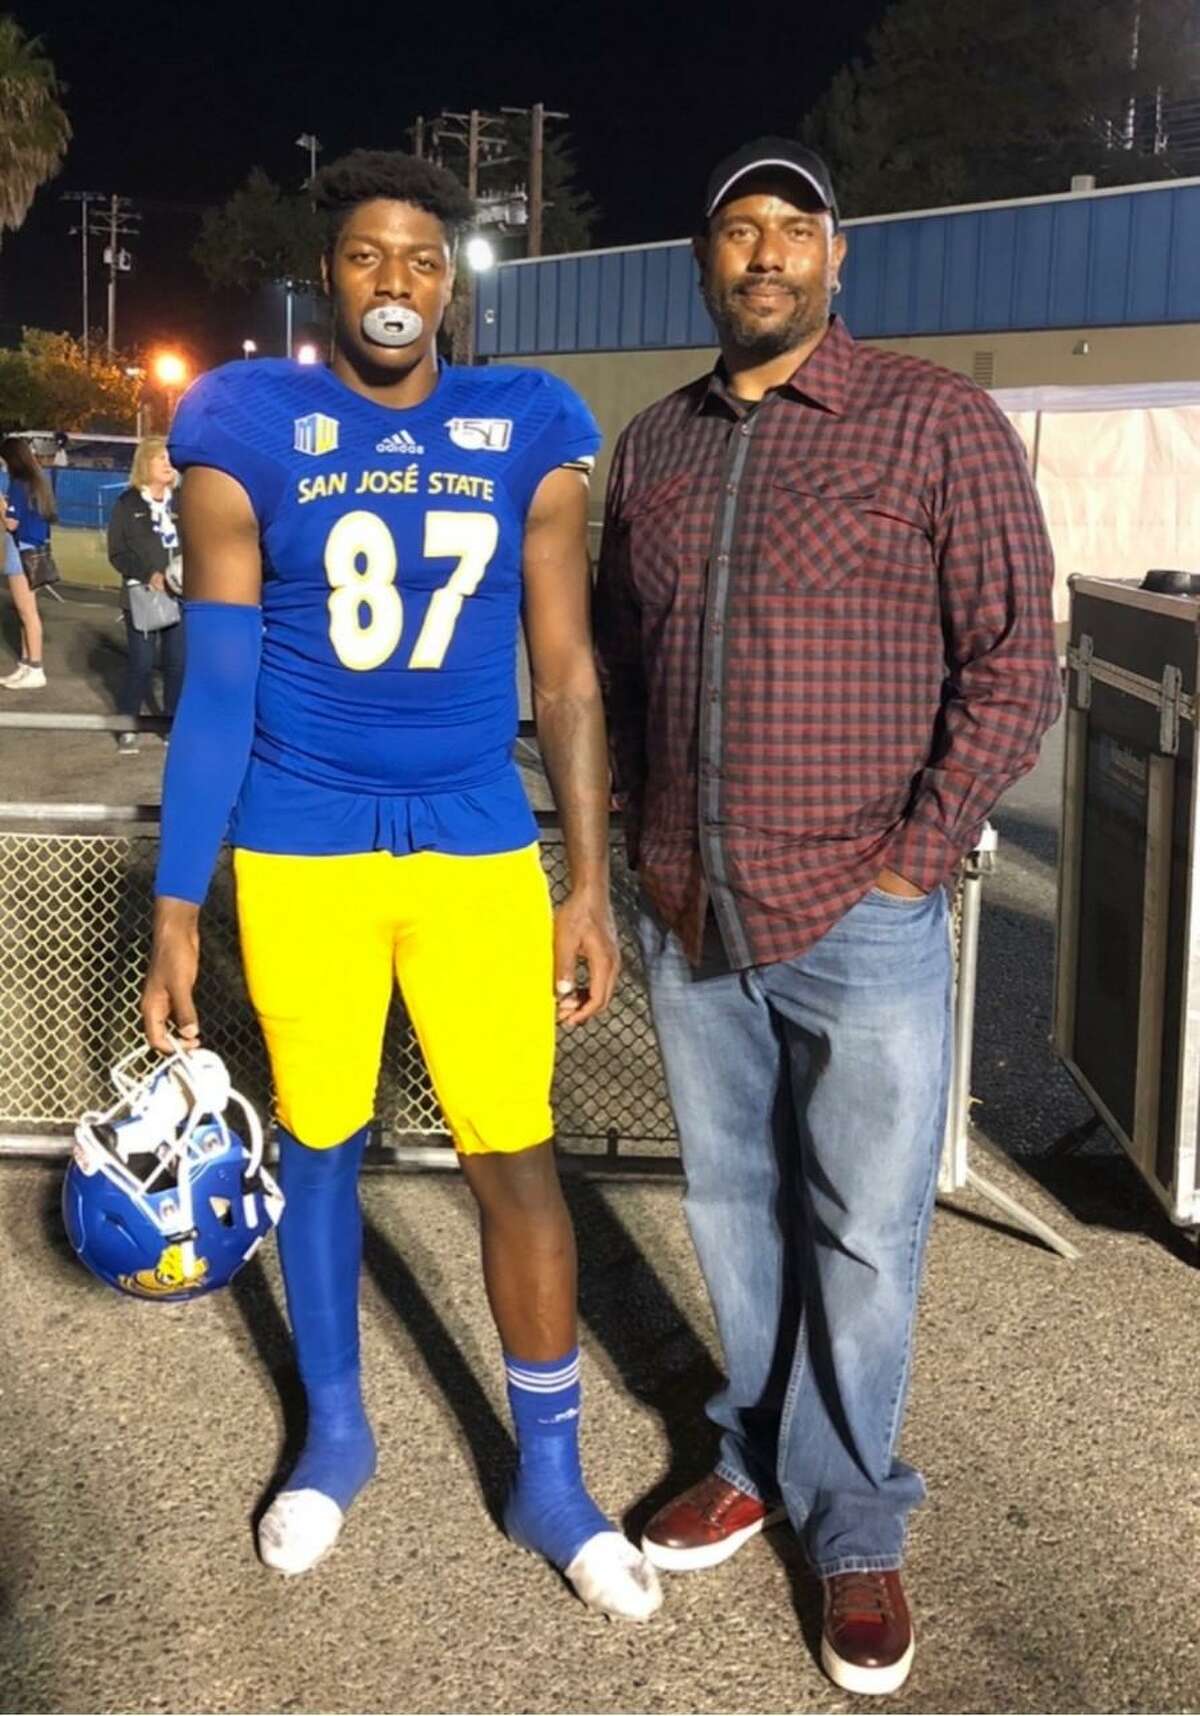 San Jose State tight end Derrick Deese Jr. and his father, Derrick, a former 49ers offensive lineman.